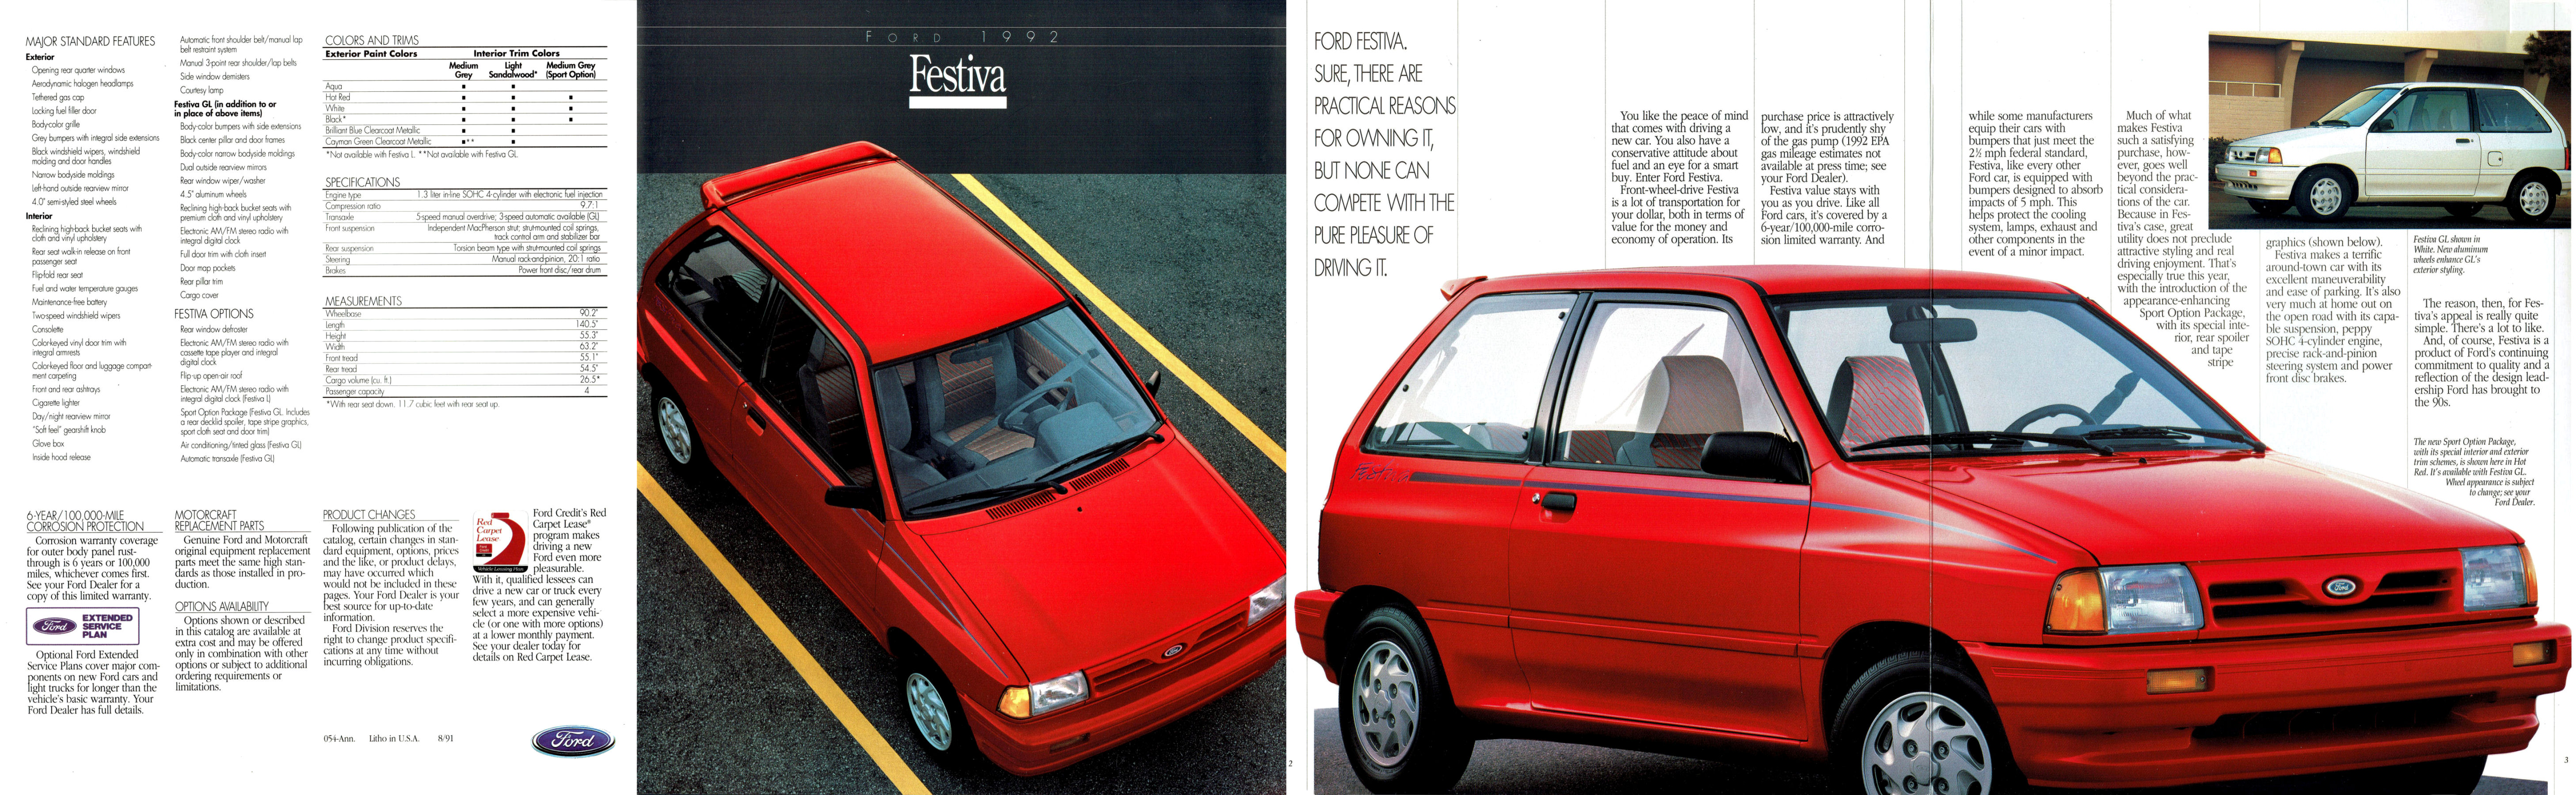 1992 Ford Festiva-Side A